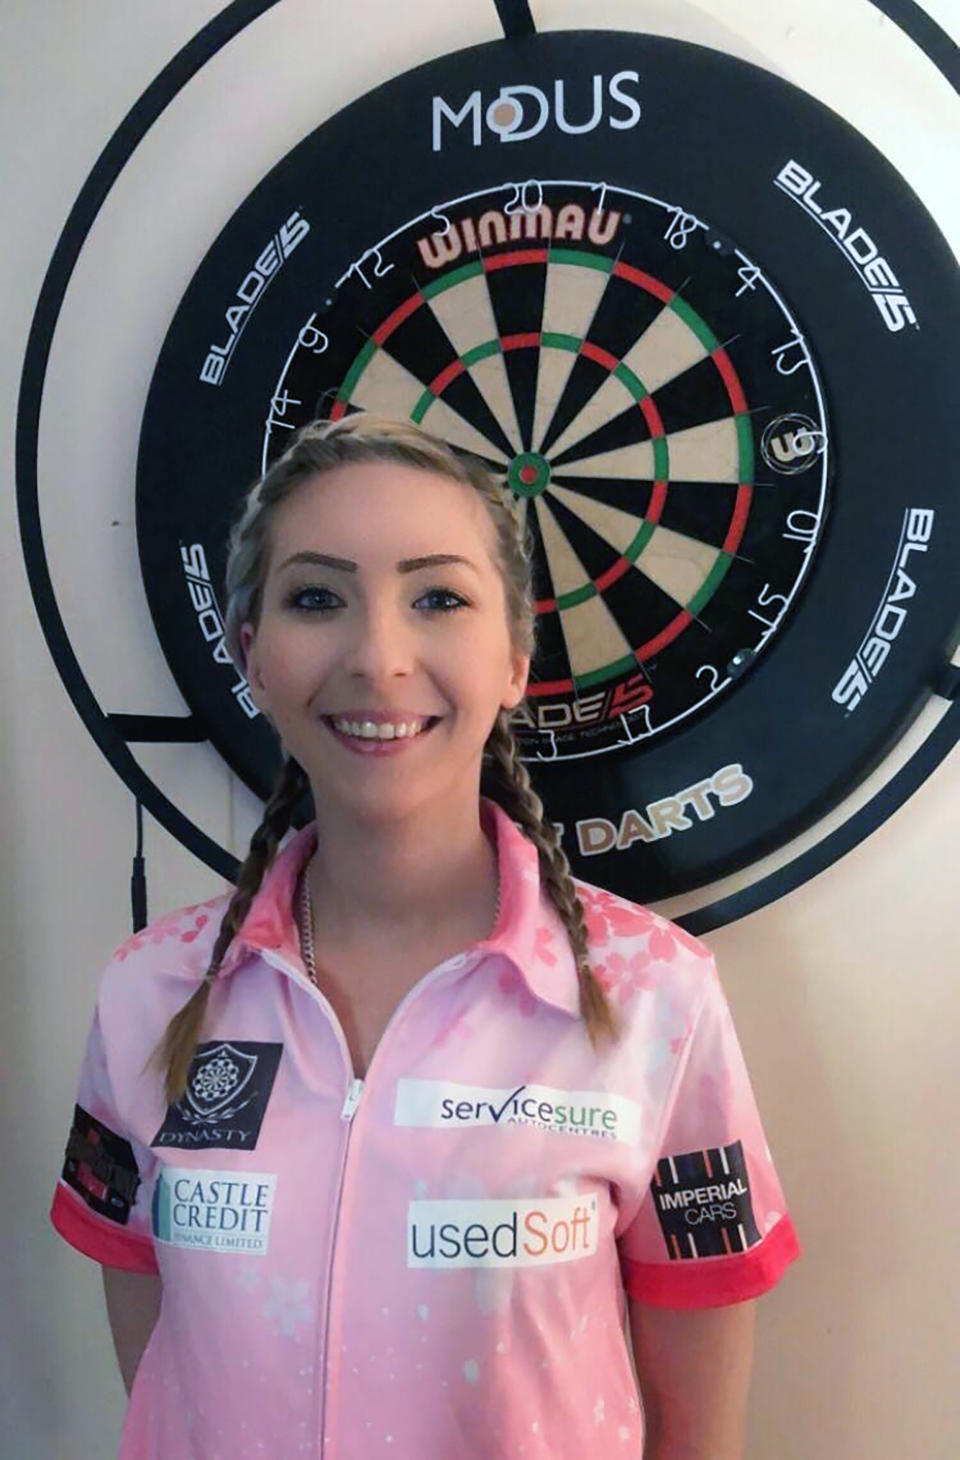 Britain's premier female darts player Fallon Sherrock poses for a photo in Milton Keynes, England, Friday April 24, 2020. Sherrock became the first woman to beat a man at the darts world championship late last year, breaking down barriers in a game that is usually considered to be a man's domain. It proved to be a life-changing experience and although she is now on lockdown because of the coronavirus she will regularly play in future men's events, Sherrock tells The Associated Press Friday April 24, 2020. (Sue Sherrock via AP)